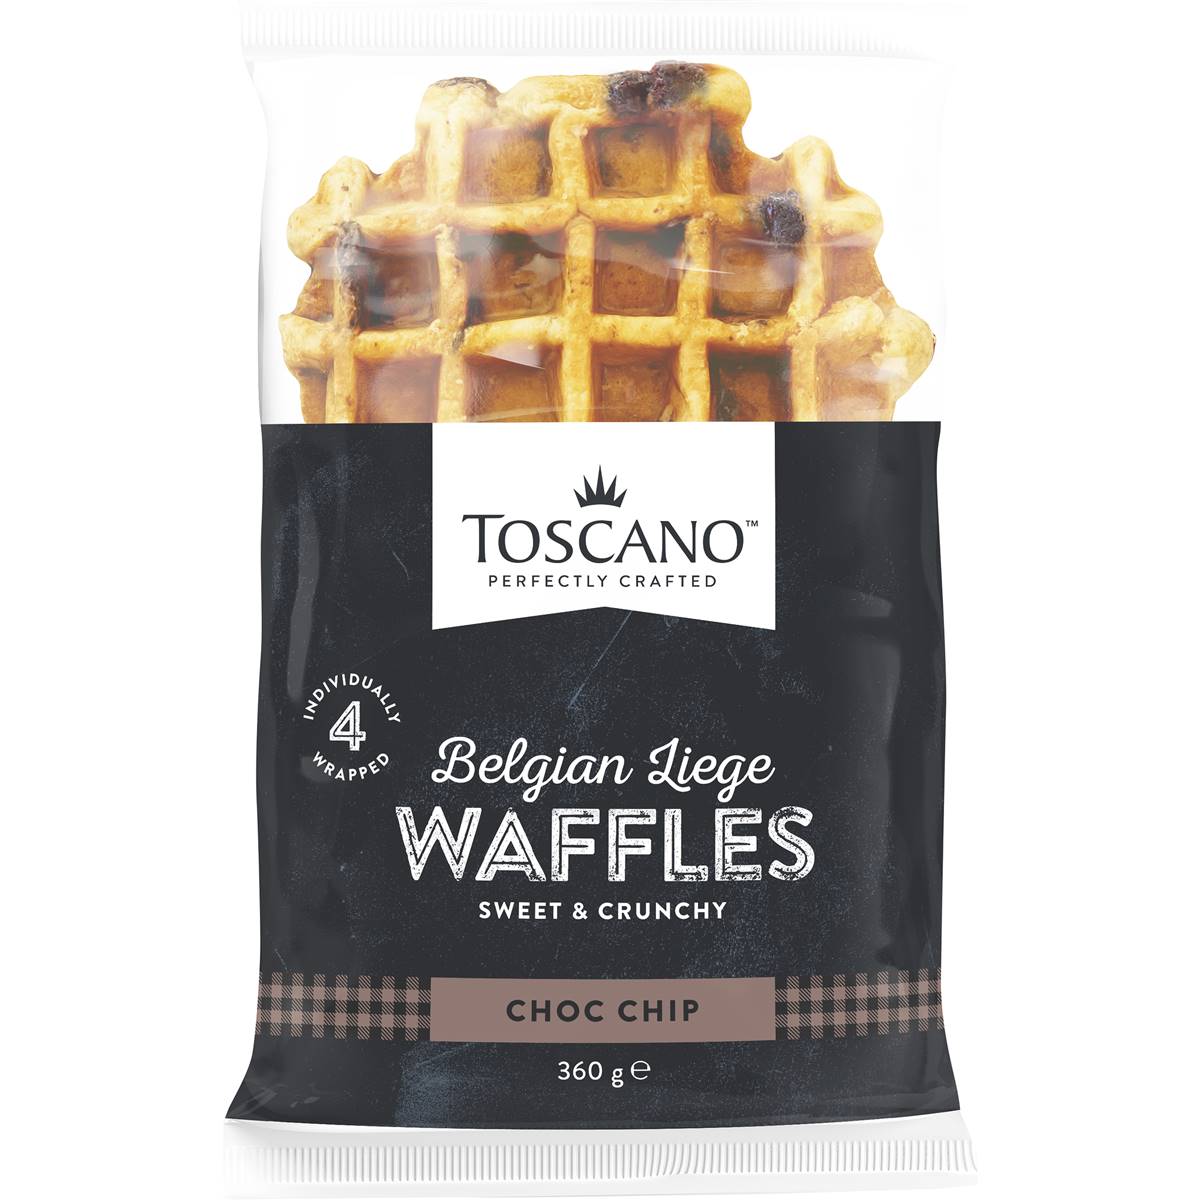 Calories in Toscano Waffles Choc Chip